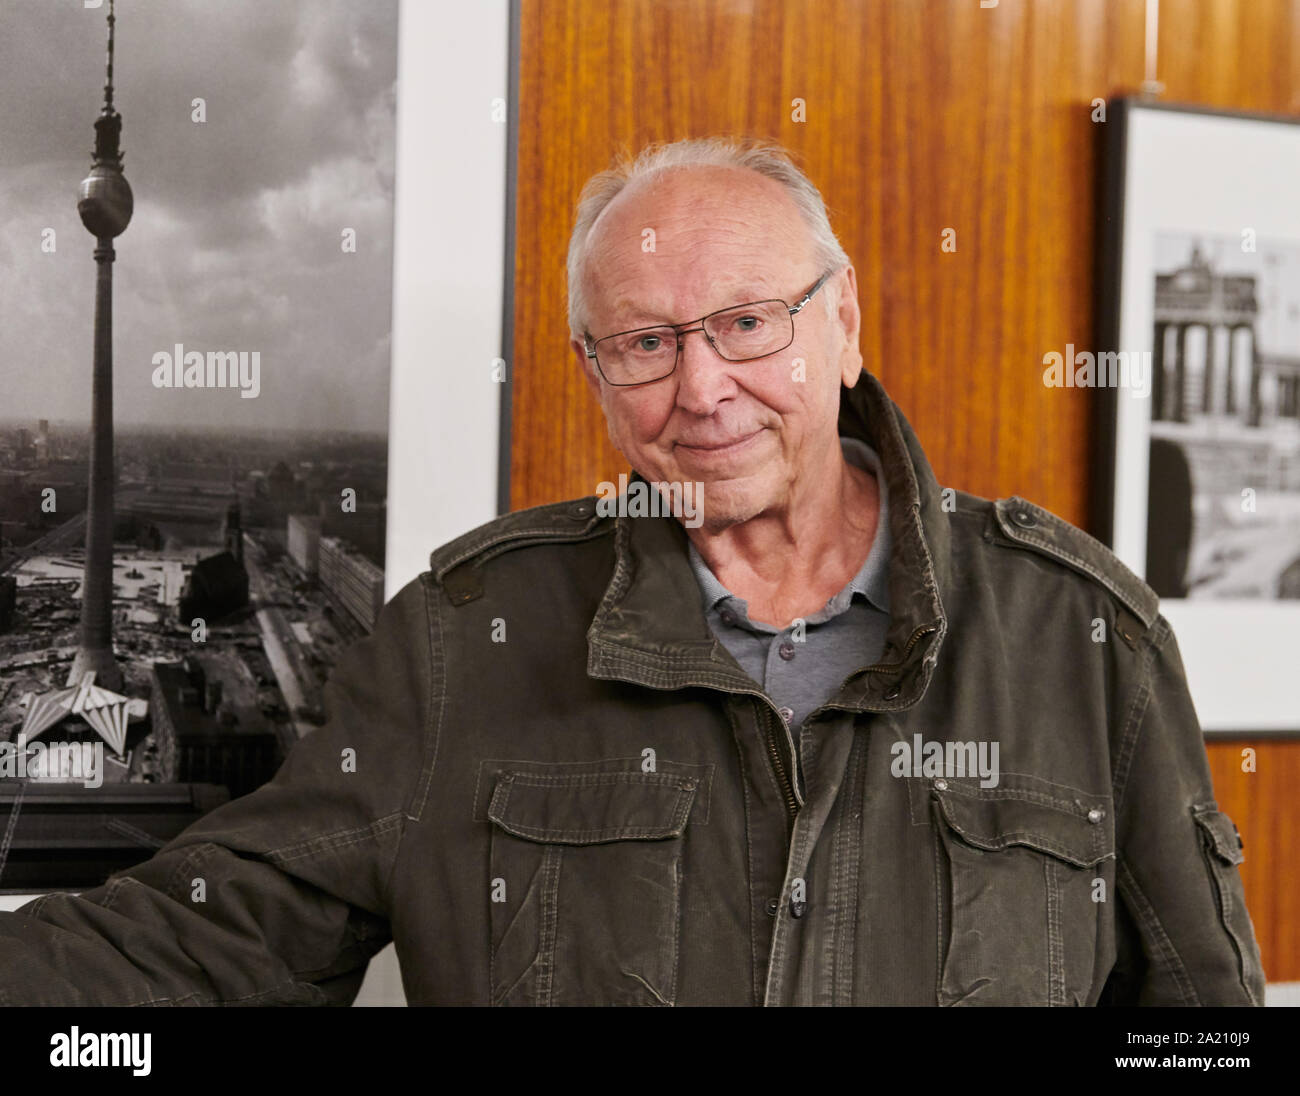 Berlin, Germany. 30th Sep, 2019. Thomas Billhardt, photographer, stands in front of his historical pictures in the television tower. On 3 October 1969, the state leadership of the GDR ceremoniously opened the Berlin Television Tower on the occasion of its 50th birthday. Credit: Annette Riedl/dpa/Alamy Live News Stock Photo